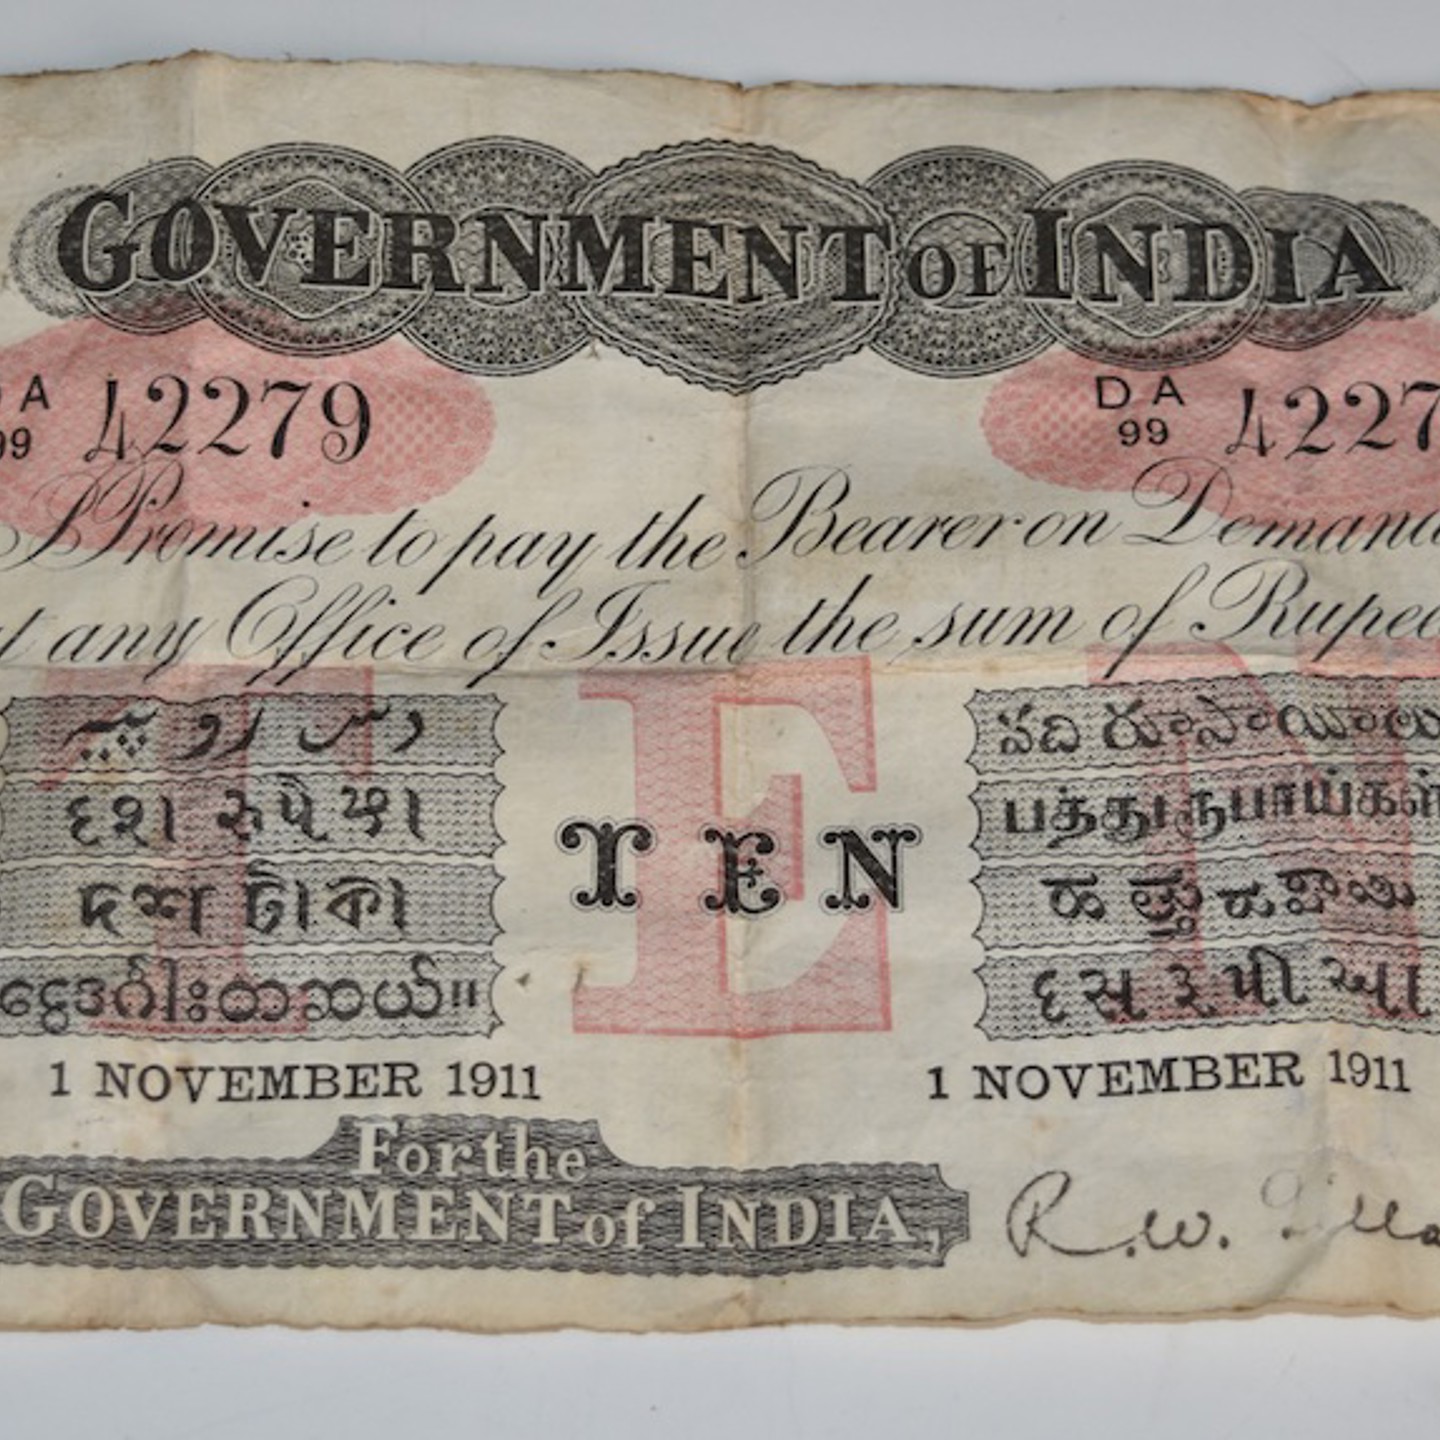 Government Of India 10 Rupees, Letter 'A' For Cawnpore, 1 November 1911, Serial Number AD99 42279, Signature R. W. Gillan, Black On Red Underprint. Sold For Ś2,800